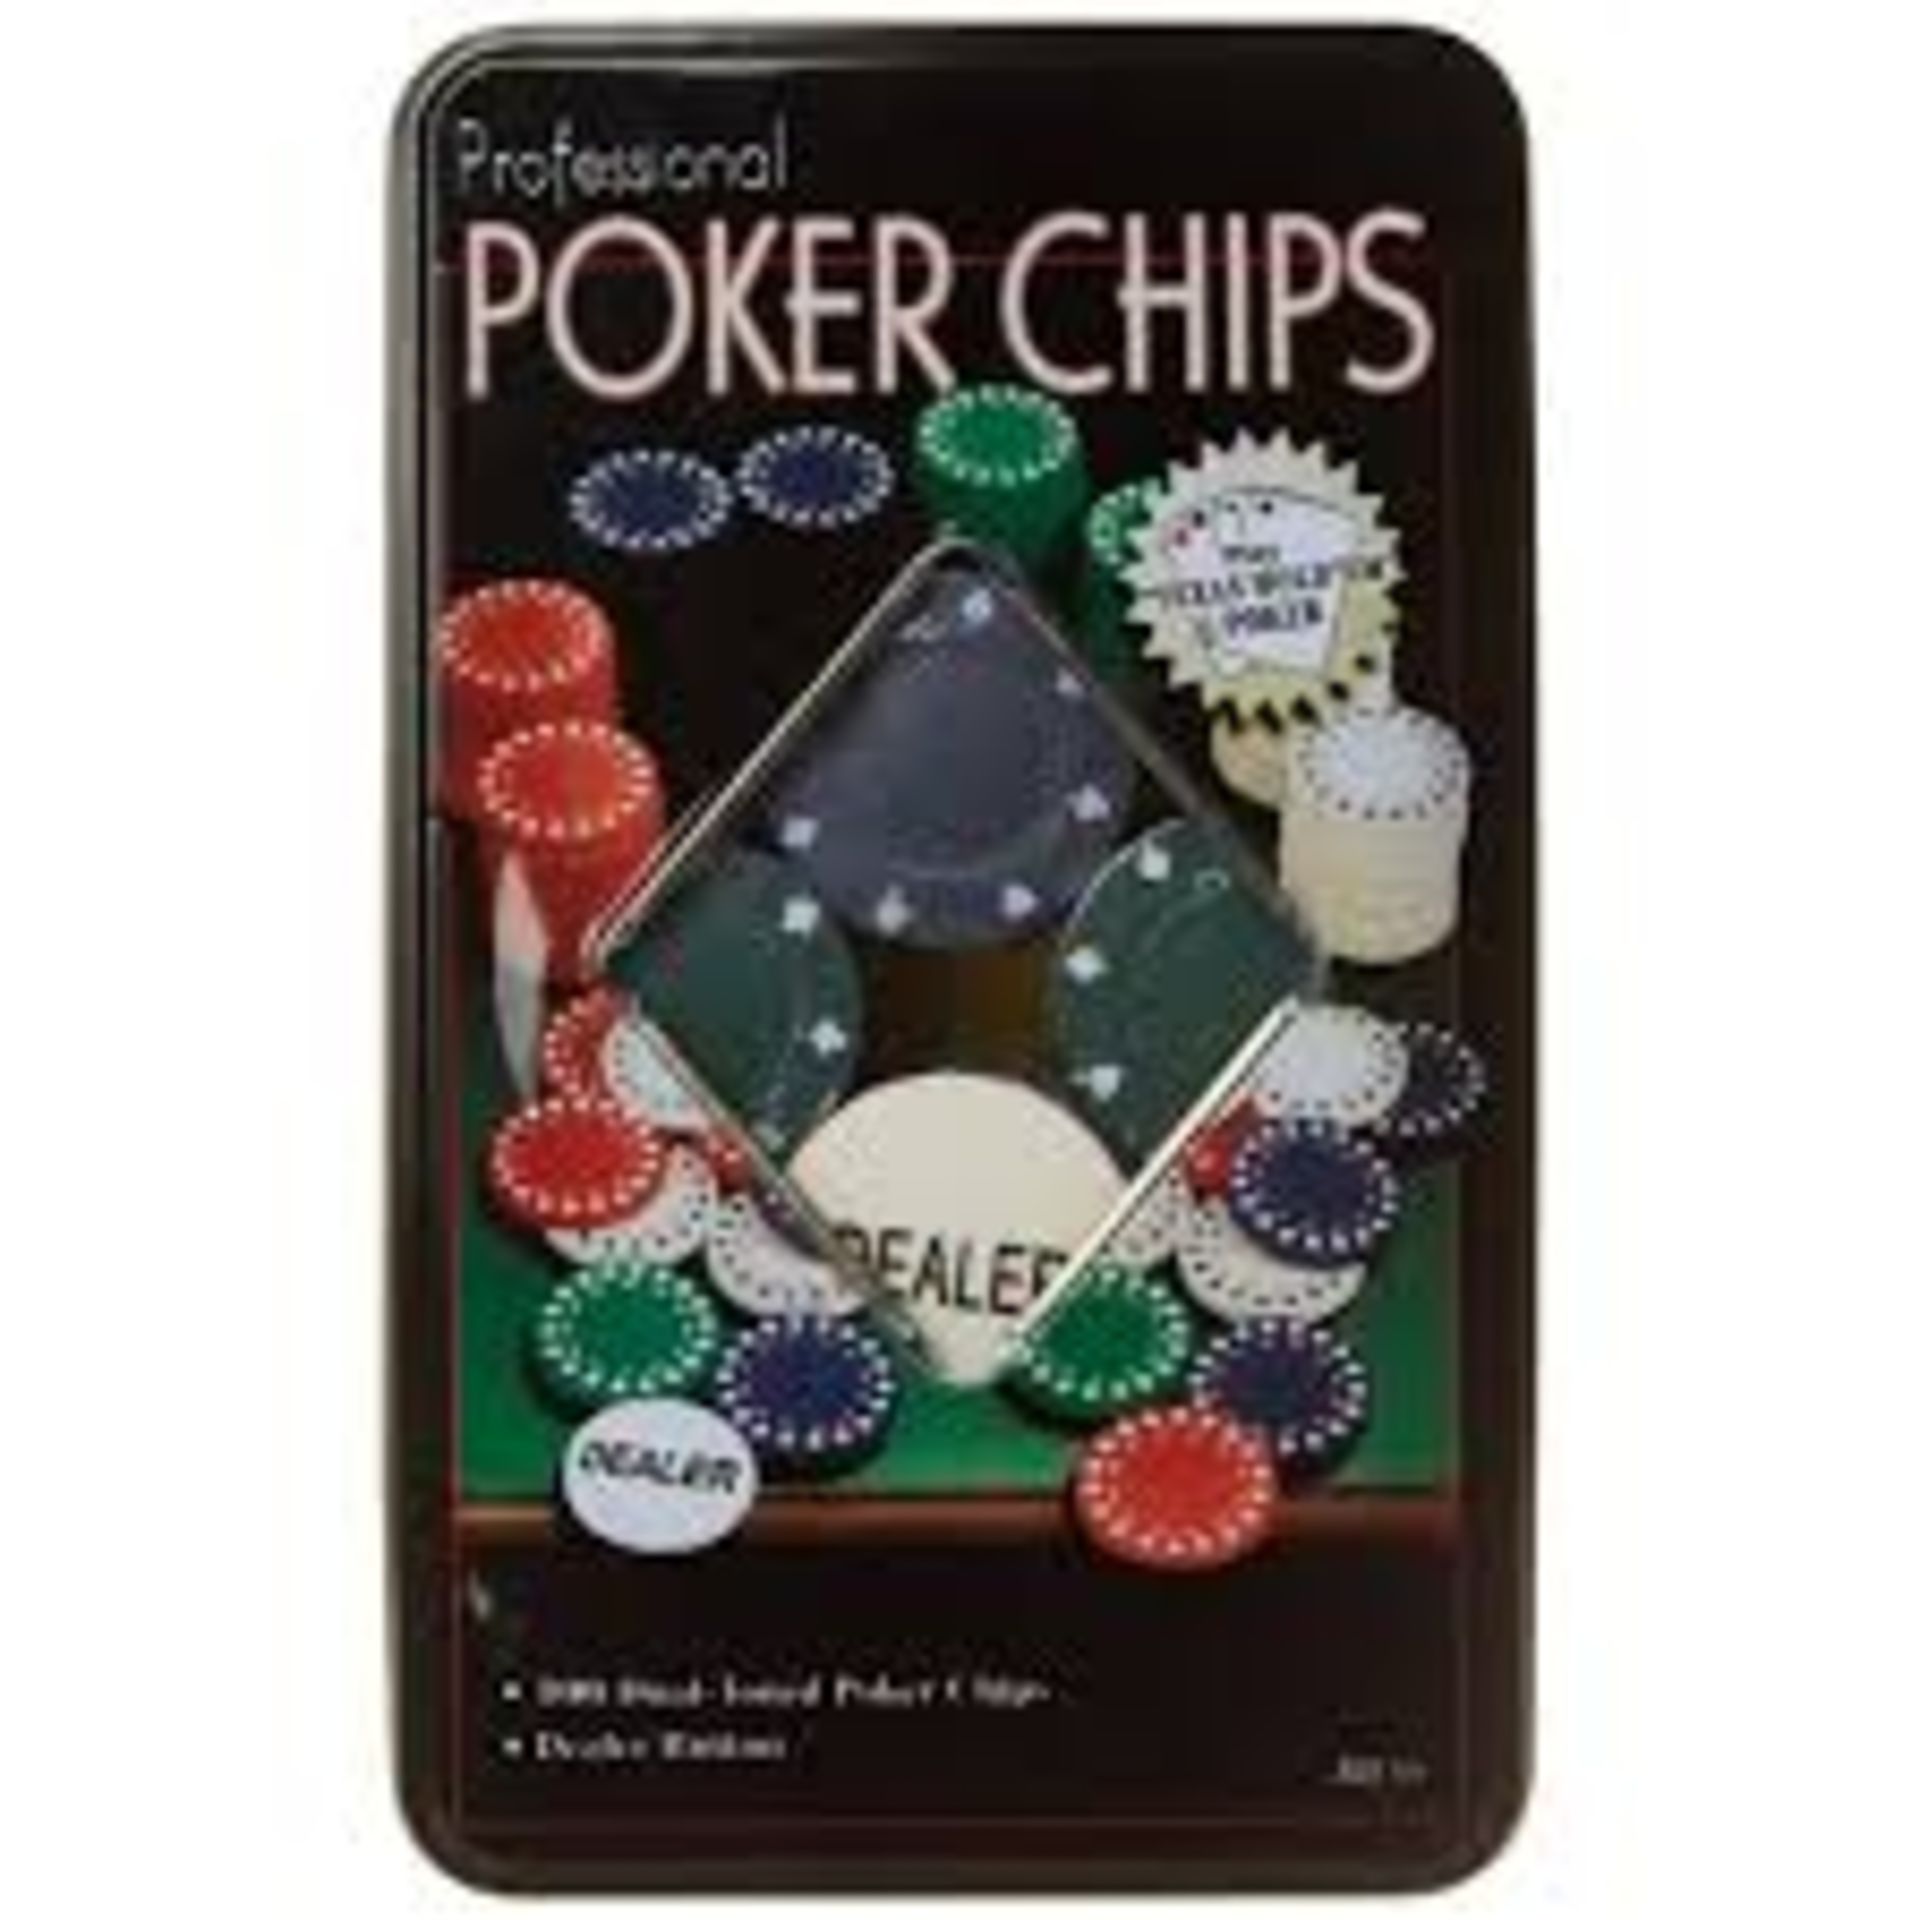 V *TRADE QTY* Brand New Box Of 100 Dual-Toned Professional Poker Chips Includes Dealer Button X 4